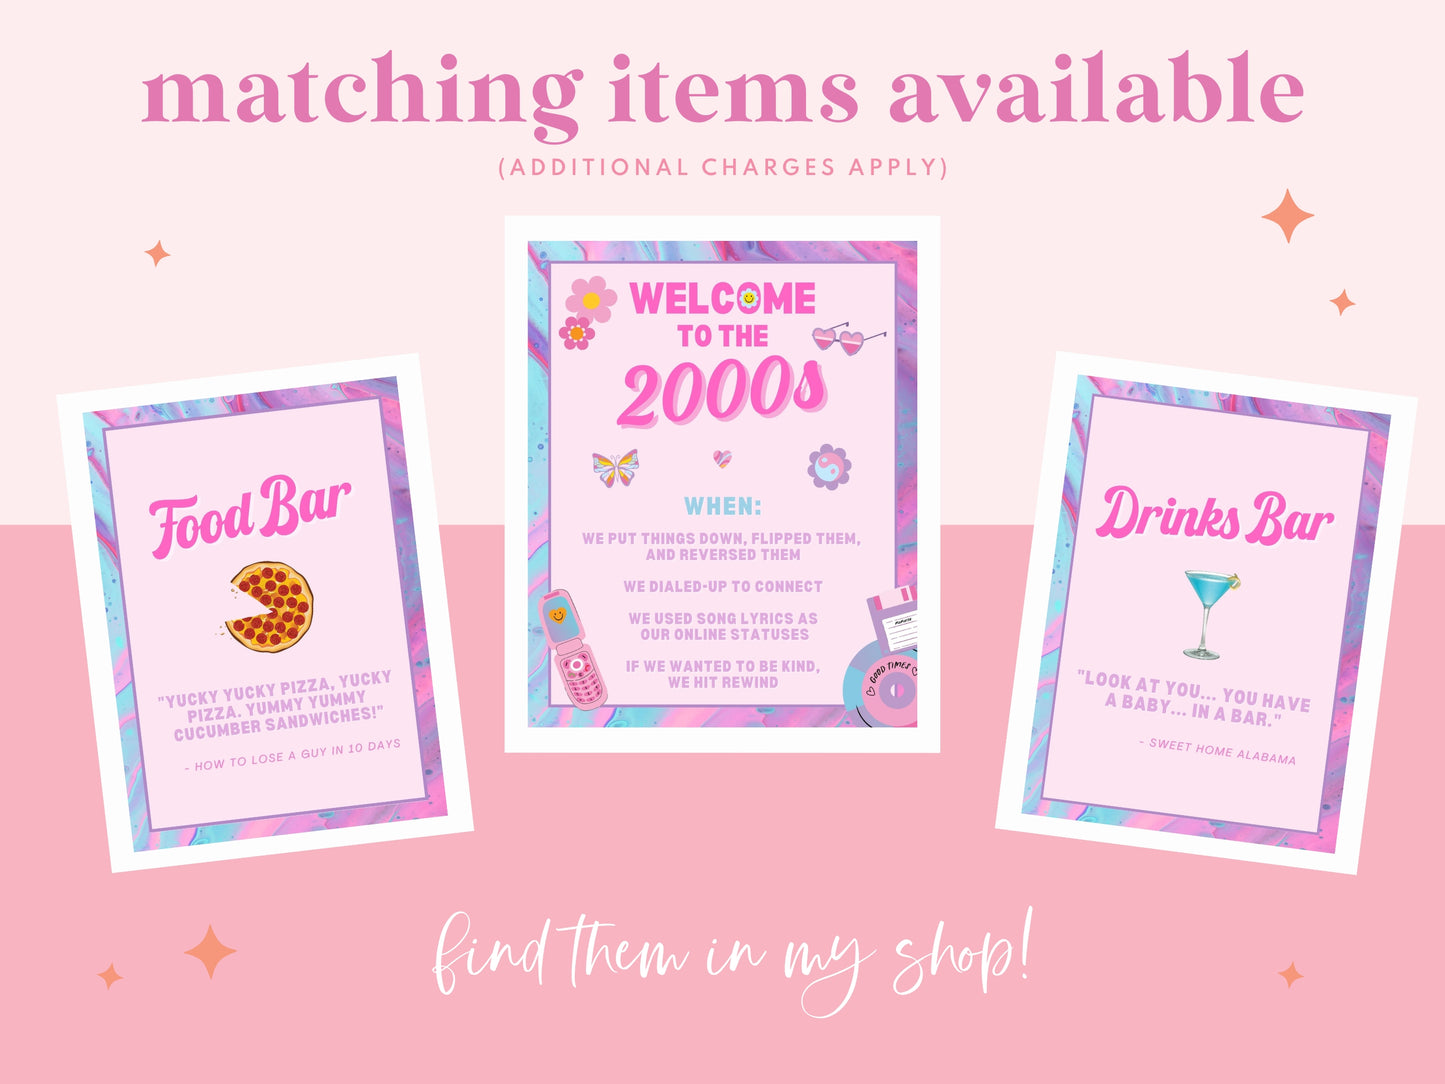 2000s Party Chick Flick Trivia Printable